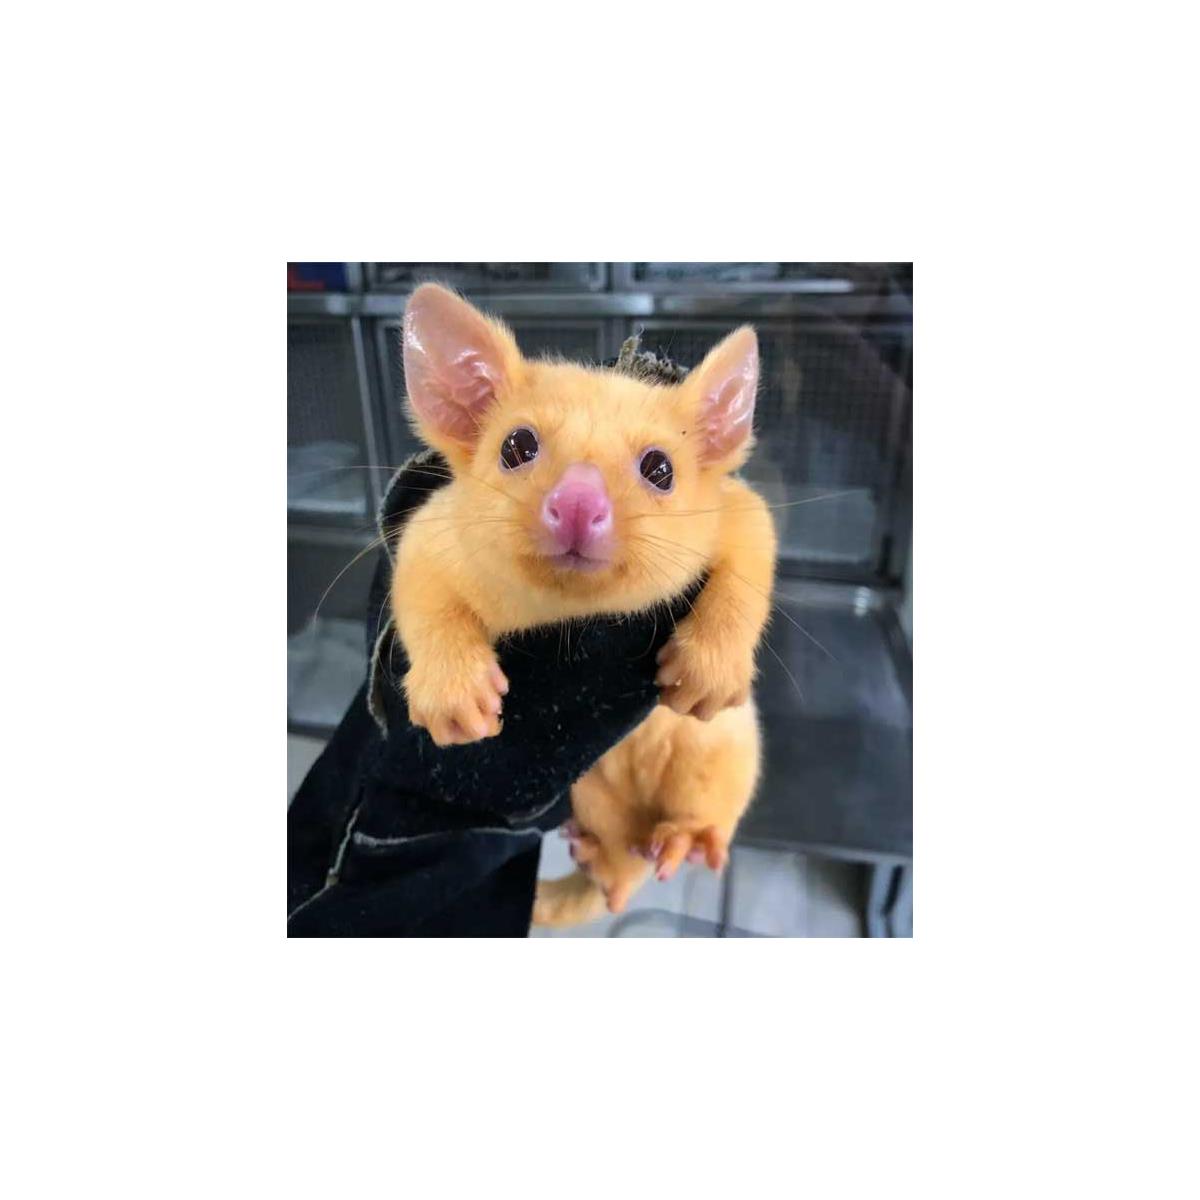 Yes, This Cute Little Possum Mutant Looks Just Like A Pikachu | HotHardware